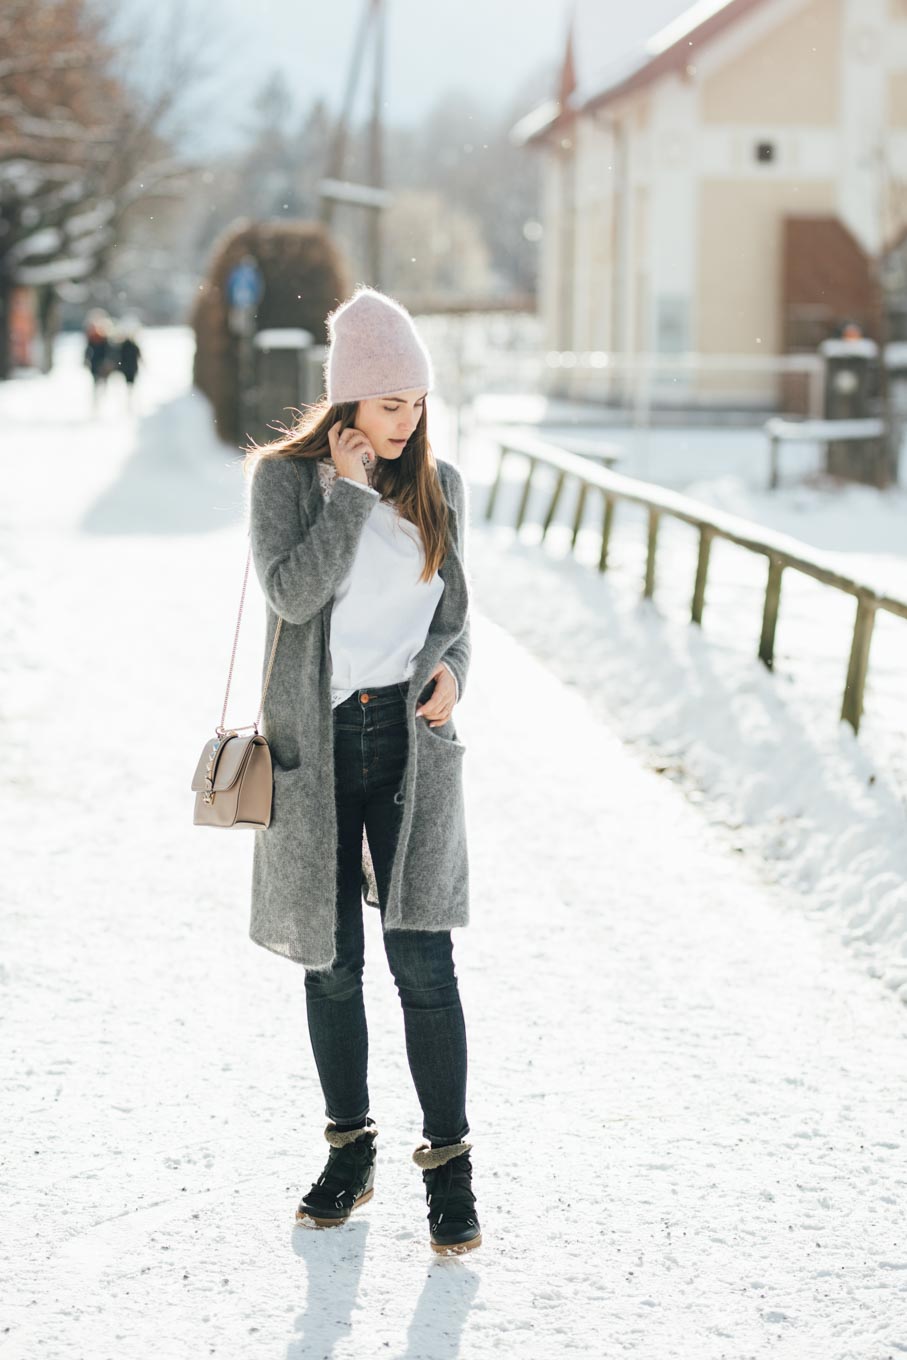 OUTFIT: Let it snow! Isabel Marant Nowles Boots for winter.